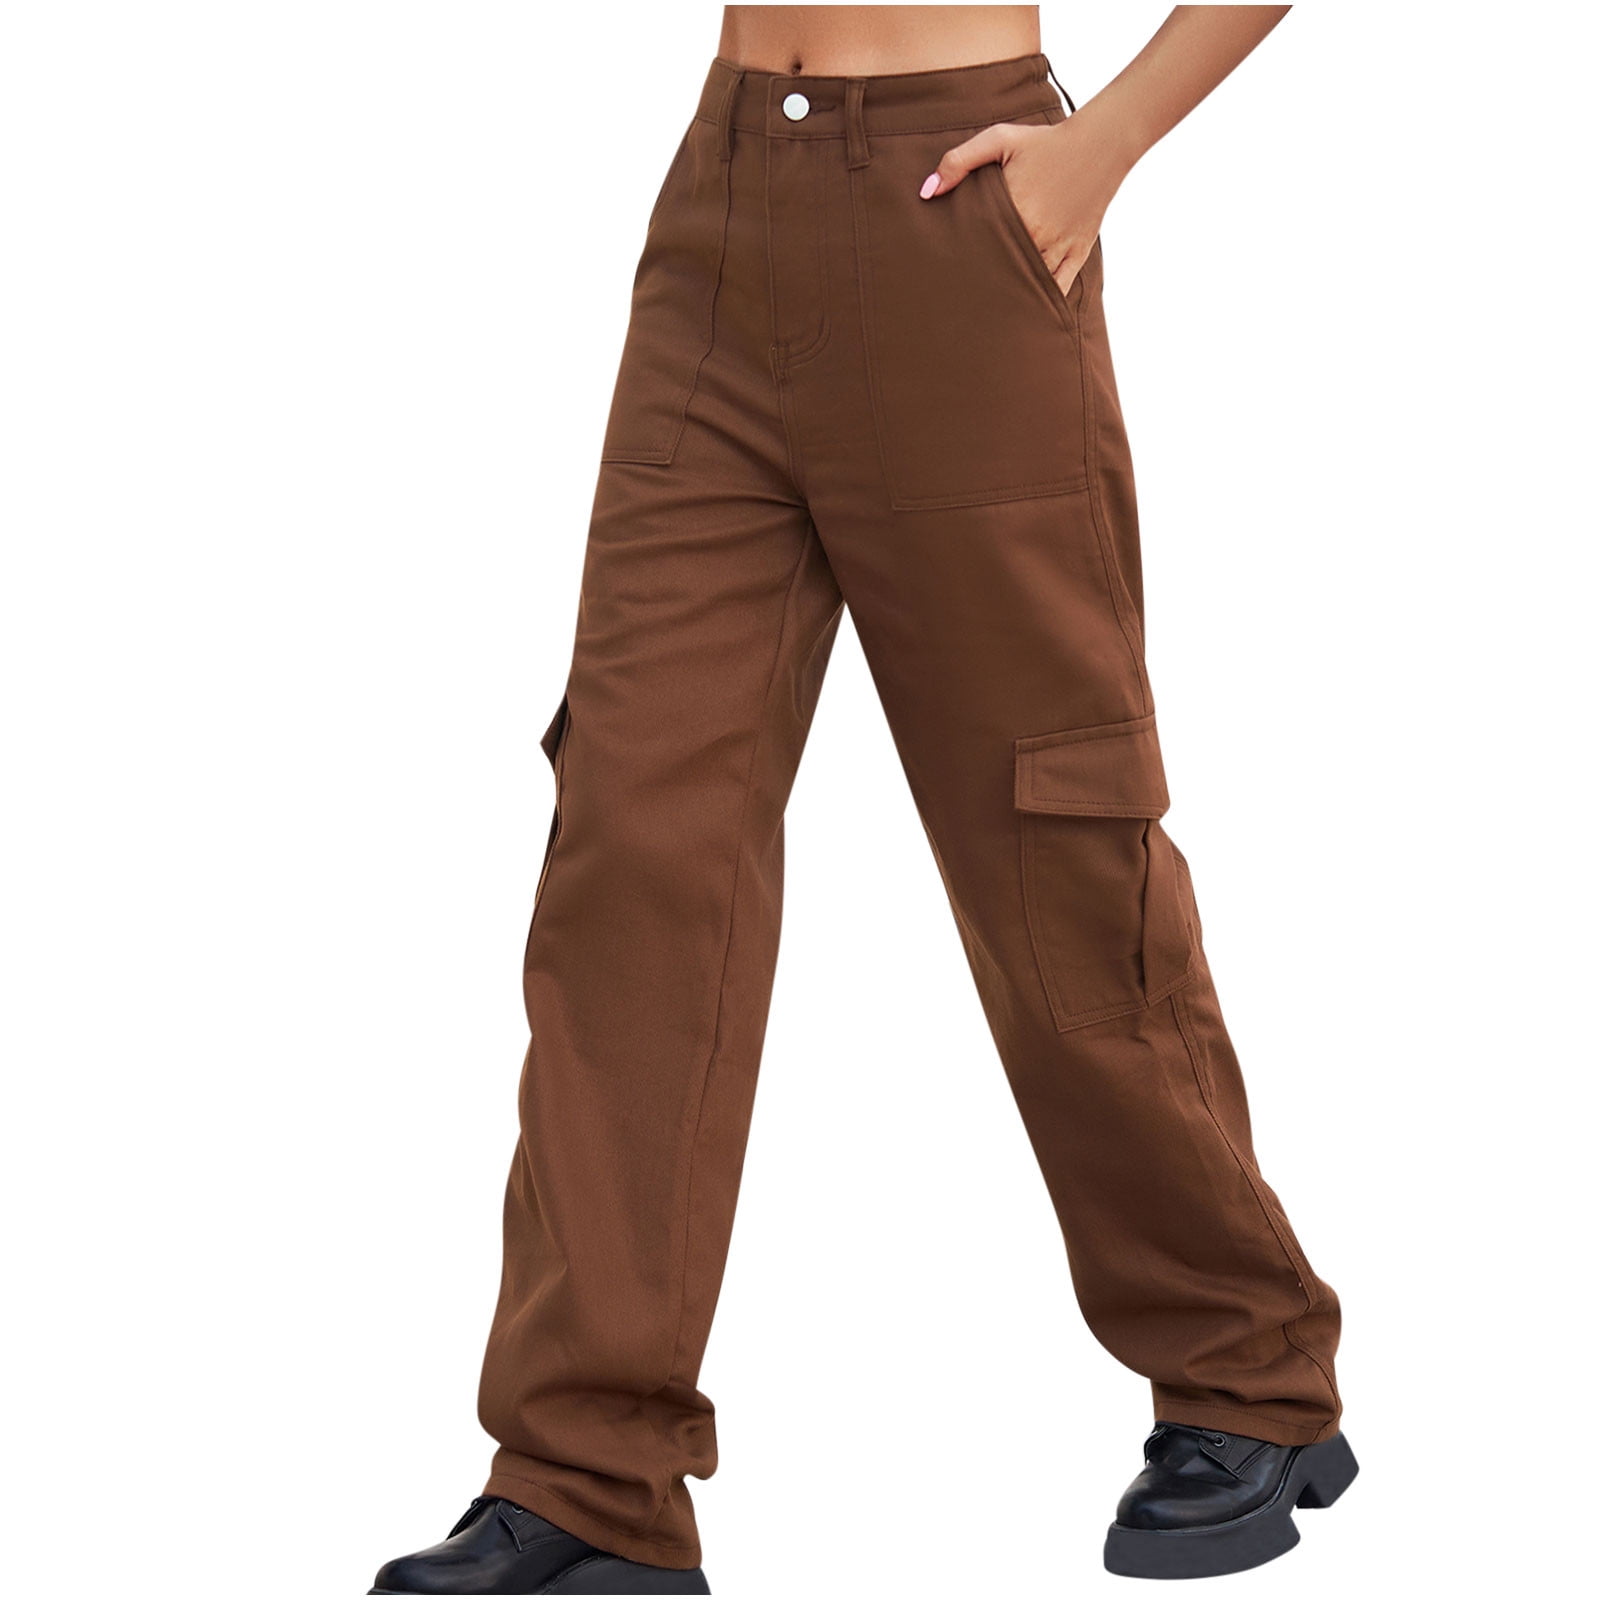 Cargo Pants for Women Y2k Pants Multiple Pockets High Waisted ...